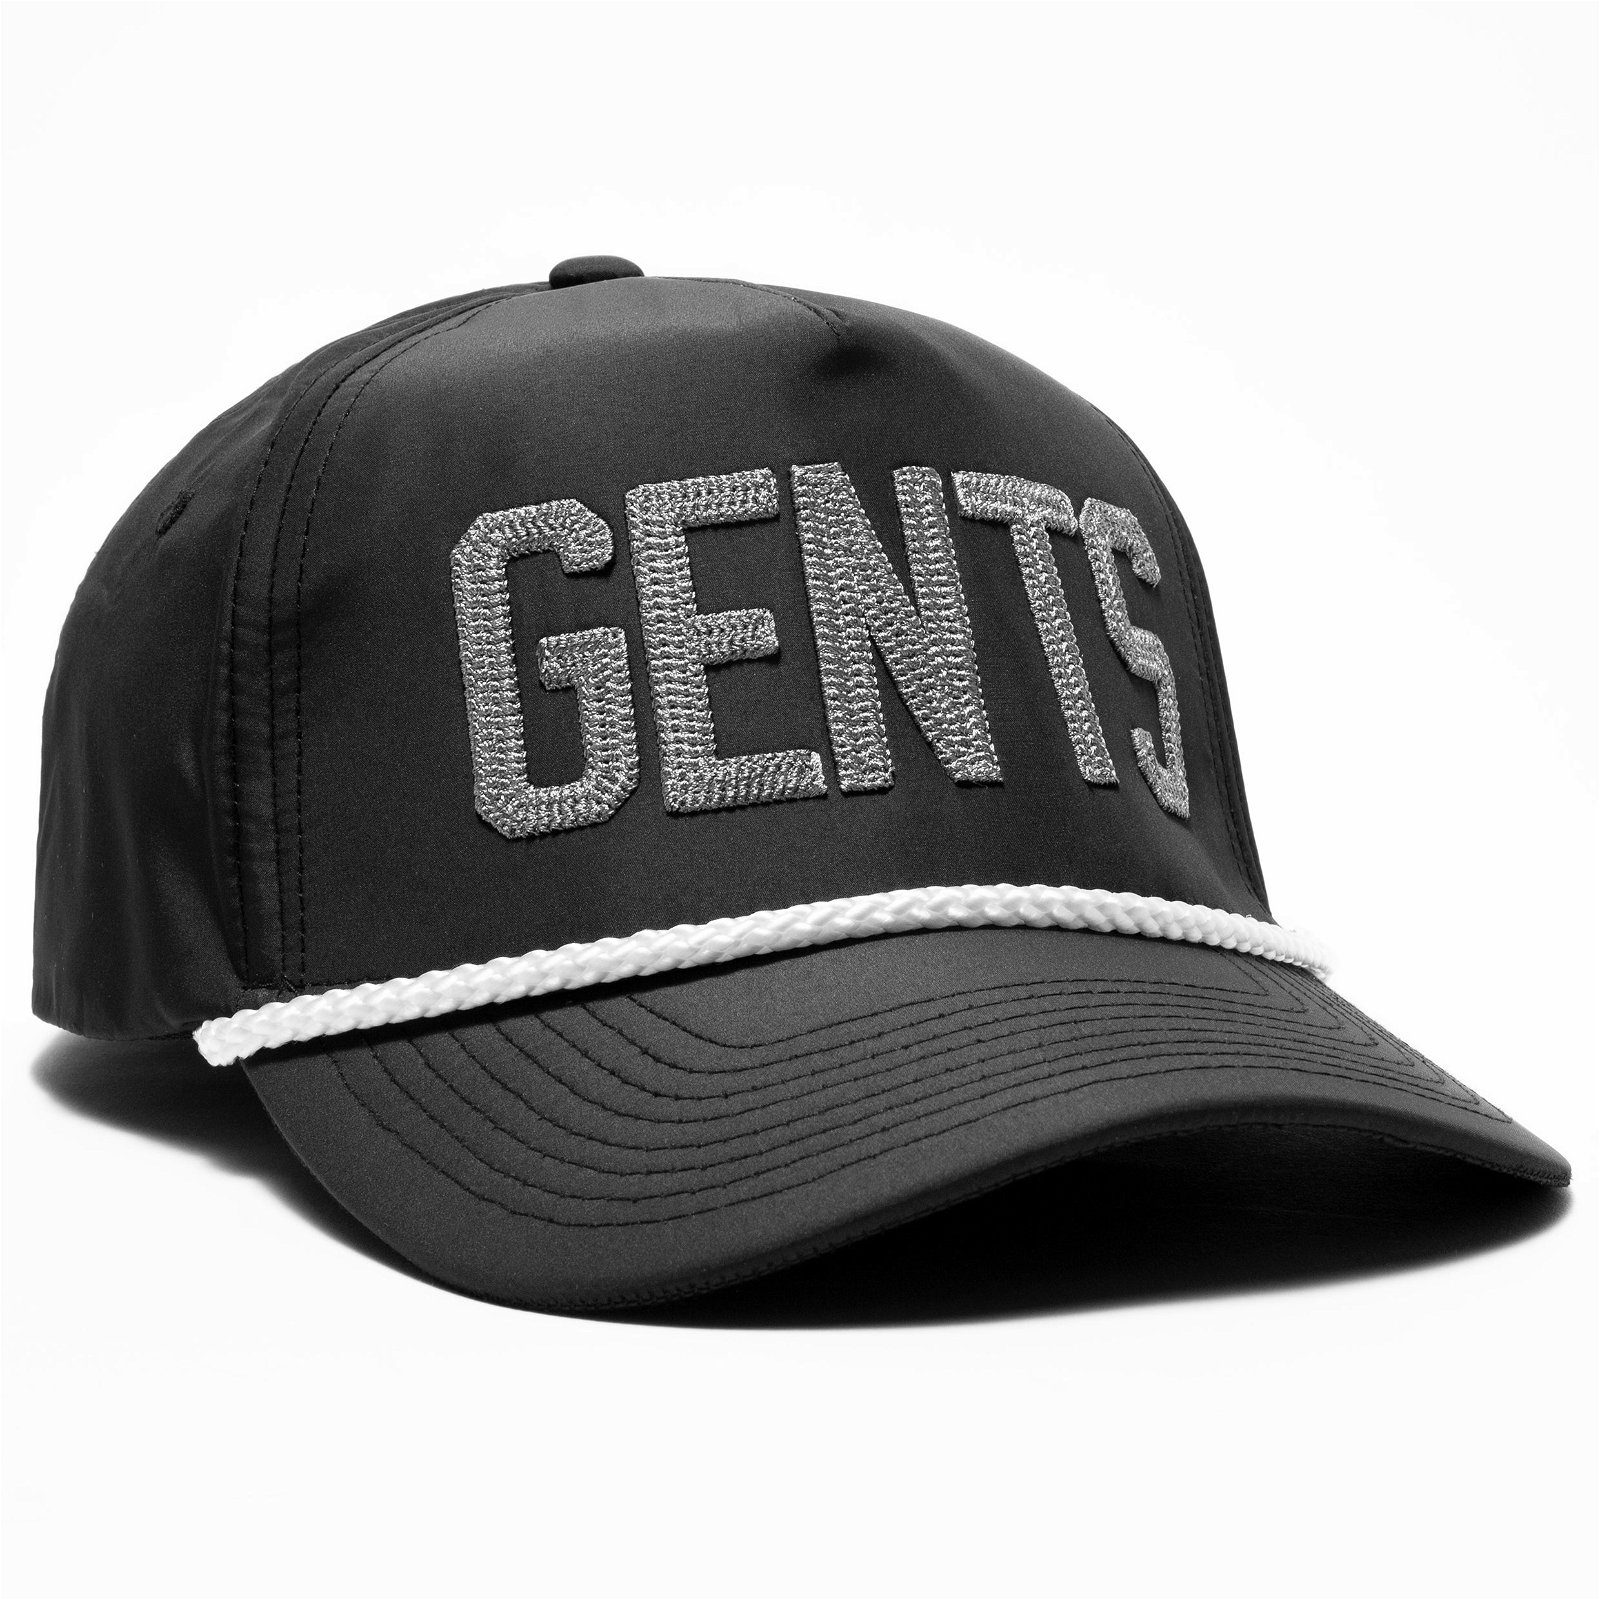 Image of Gents Golf Hat